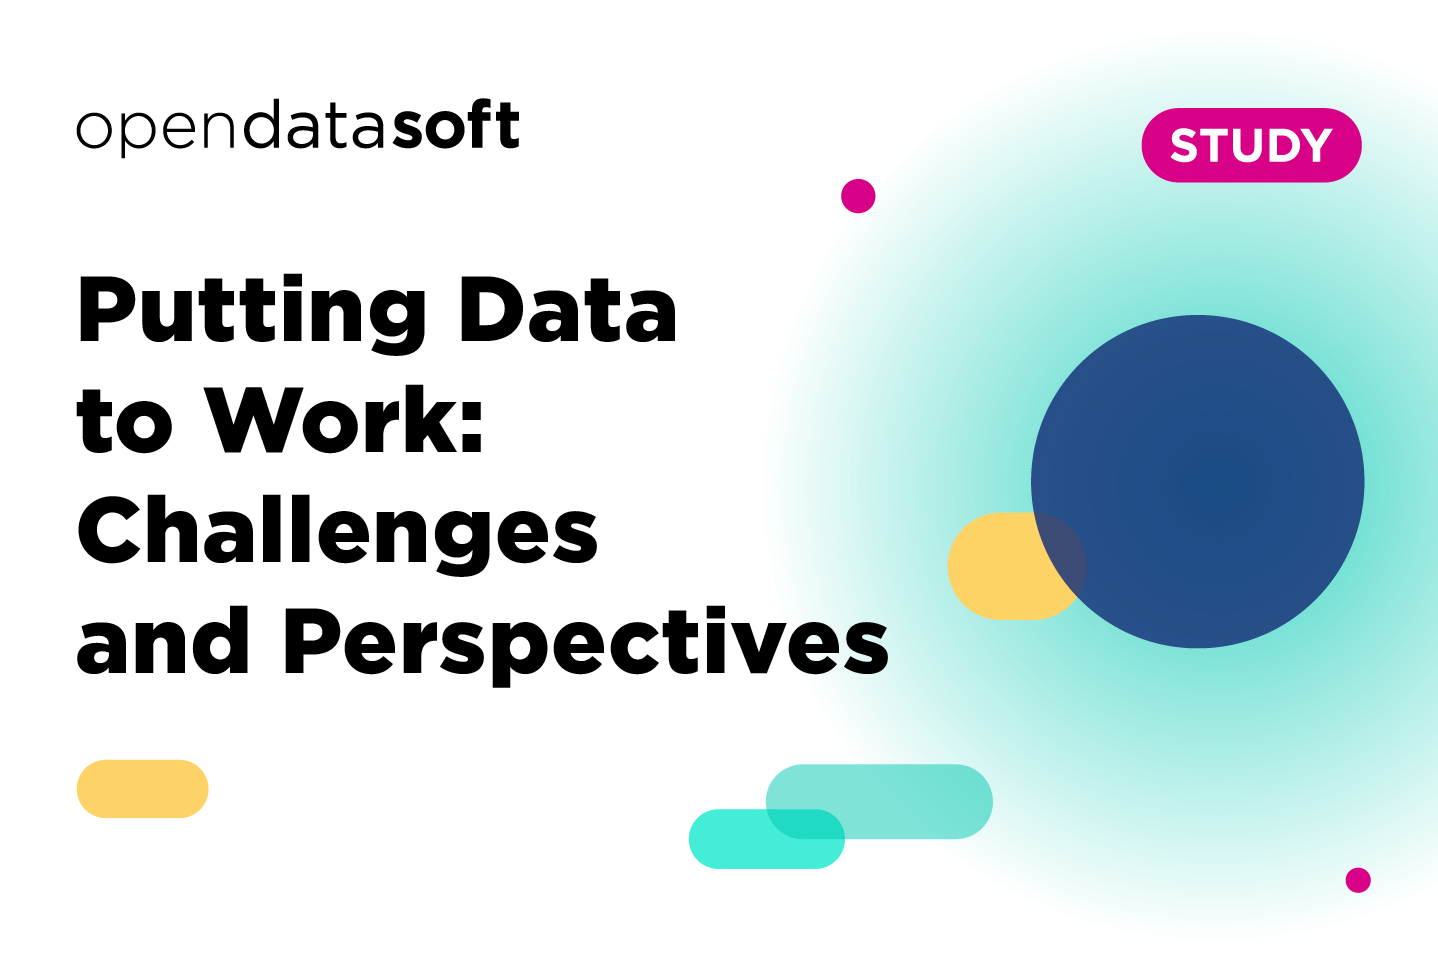 Putting Data to Work: Challenges and Perspectives